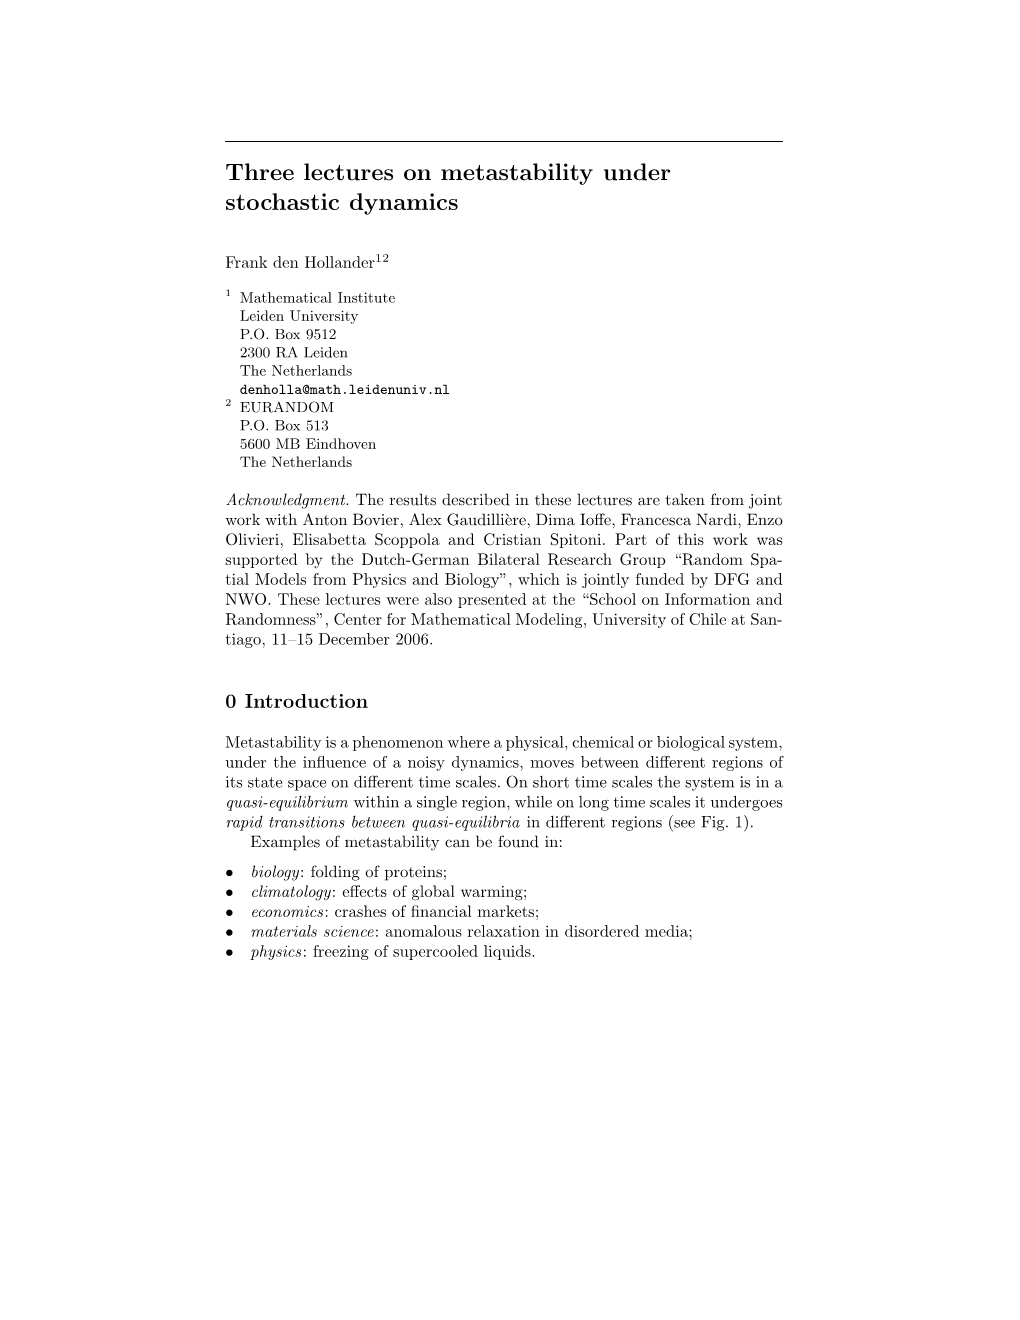 Three Lectures on Metastability Under Stochastic Dynamics